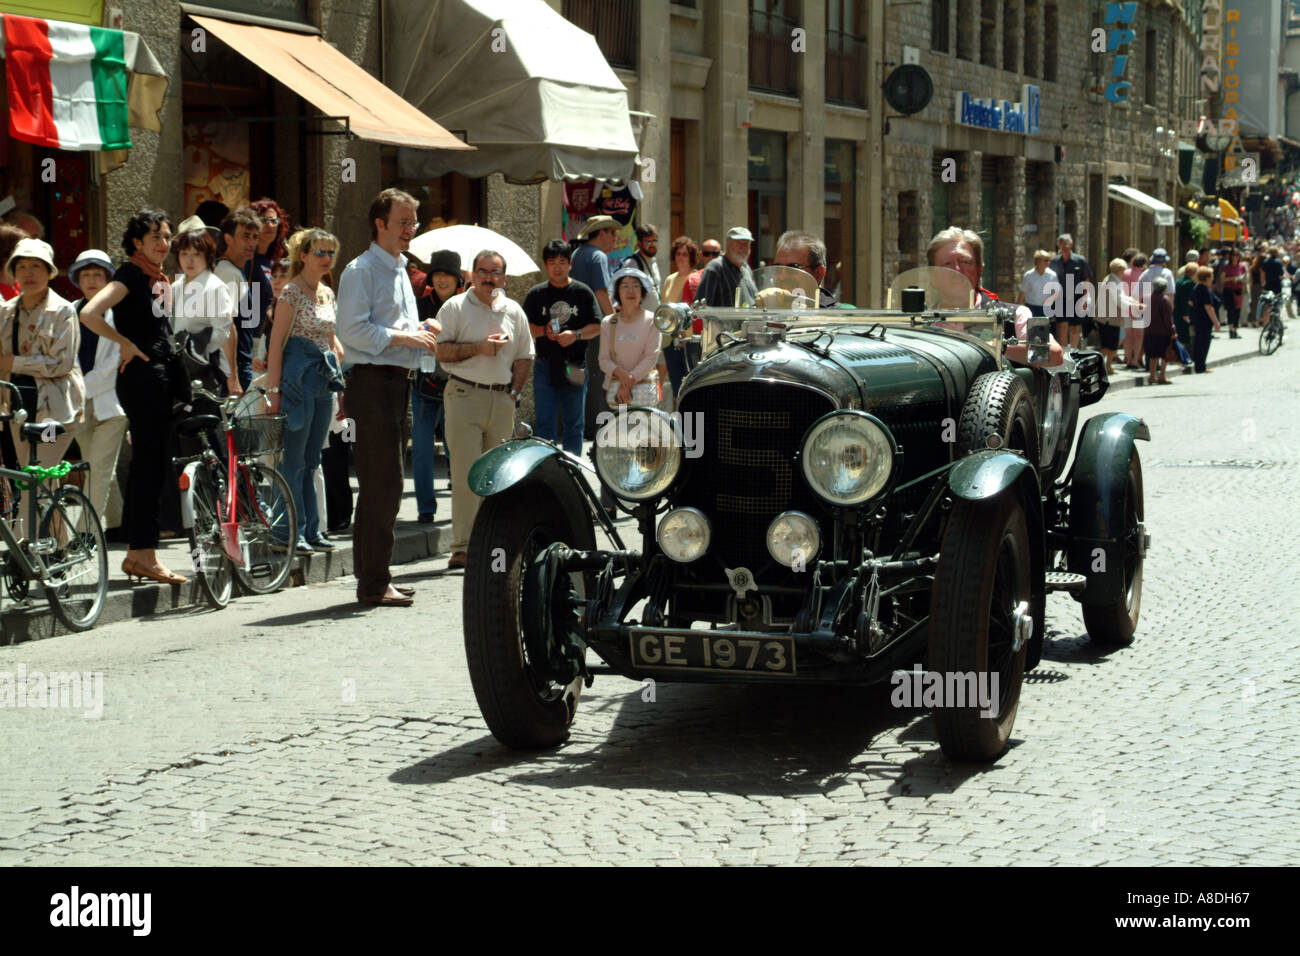 The Mille Miglia 2005 race passing through Florence Tuscany Italy EU Bentley GE1973 Stock Photo